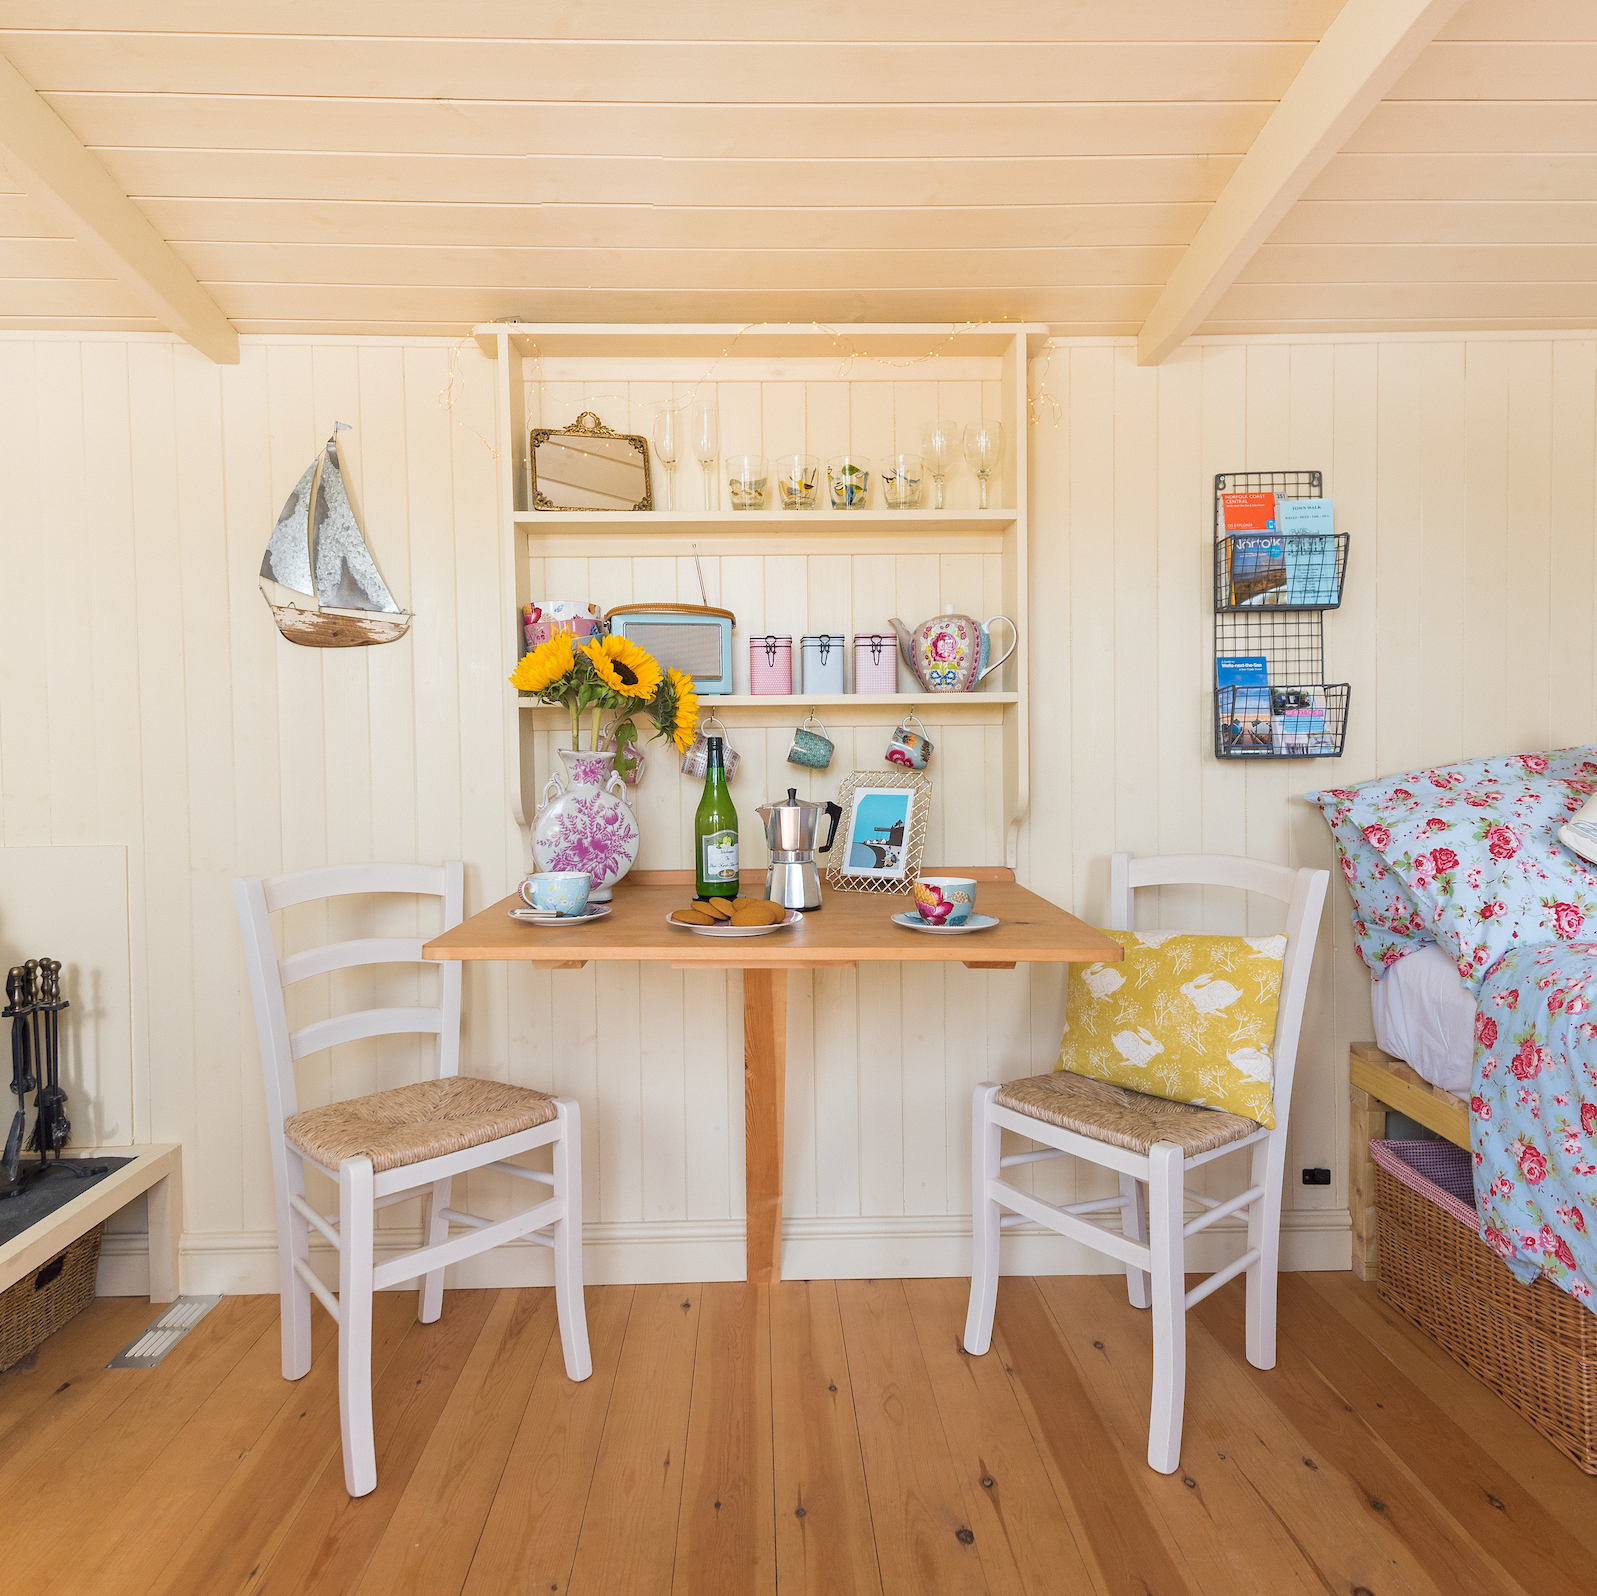 Dining table and chairs below the pretty dresser in Hut-next-the-Sea, the only self-catering Shepherd's Hut accommodation in Wells-next-the-Sea, North Norfolk.